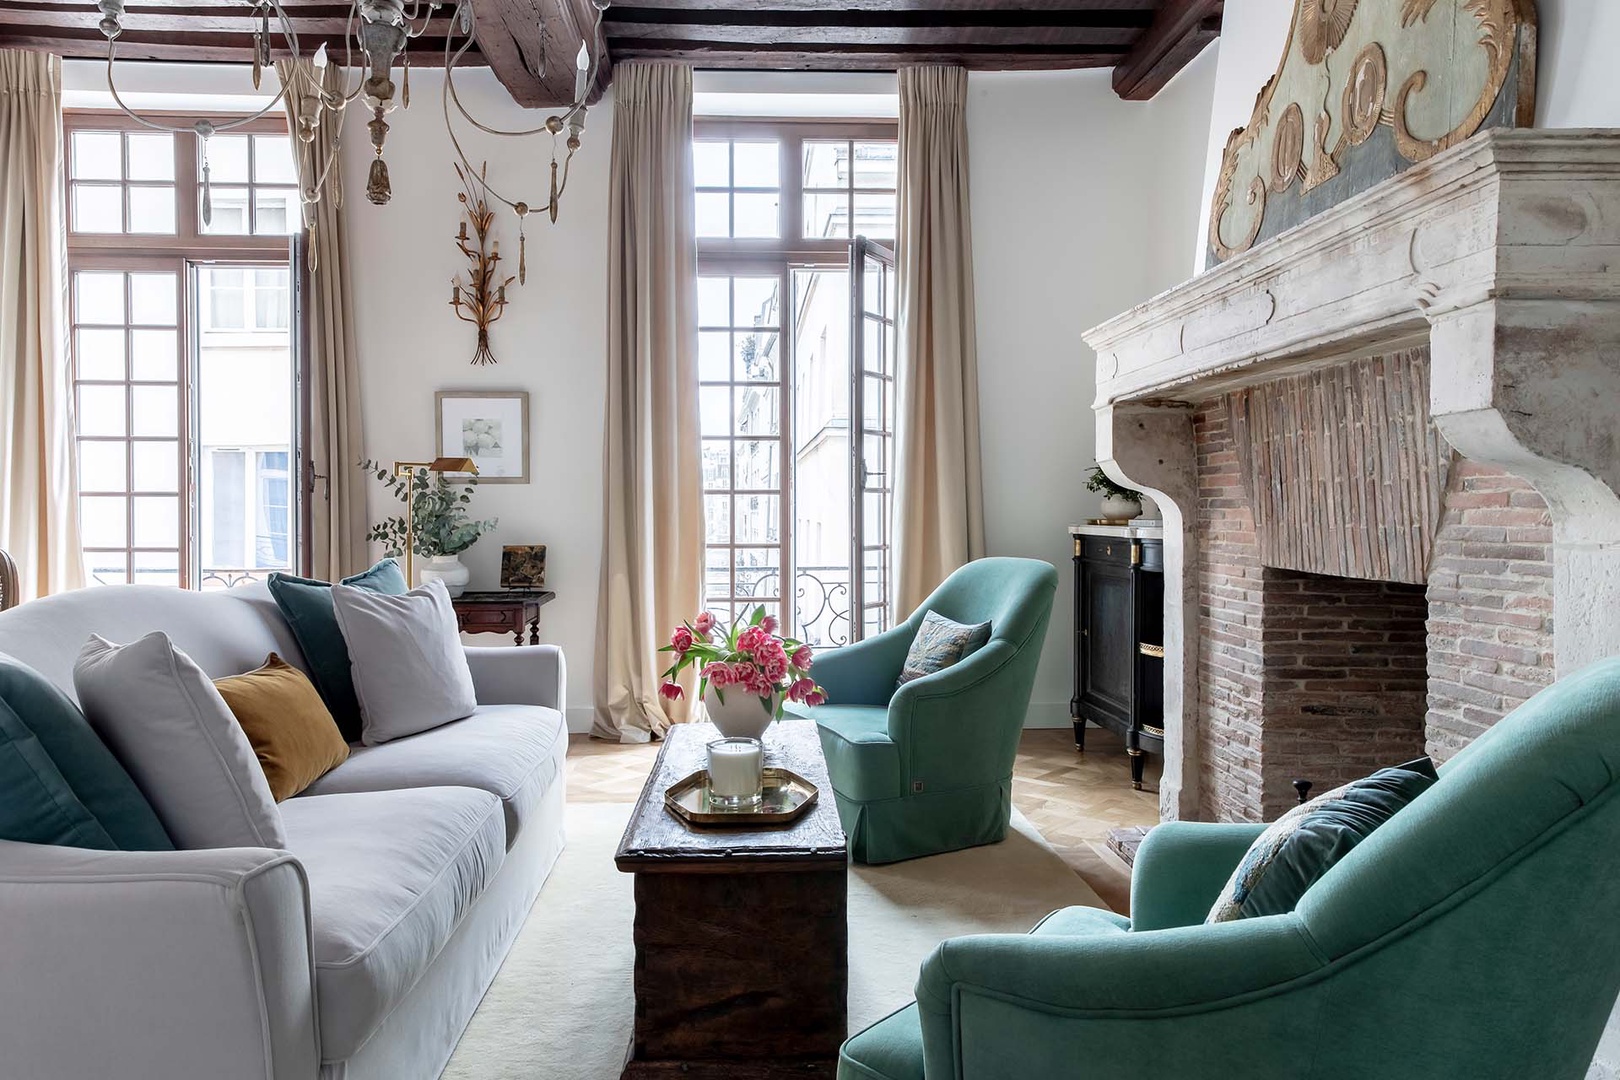 Welcome to a stunning historic stay on Île Saint-Louis!